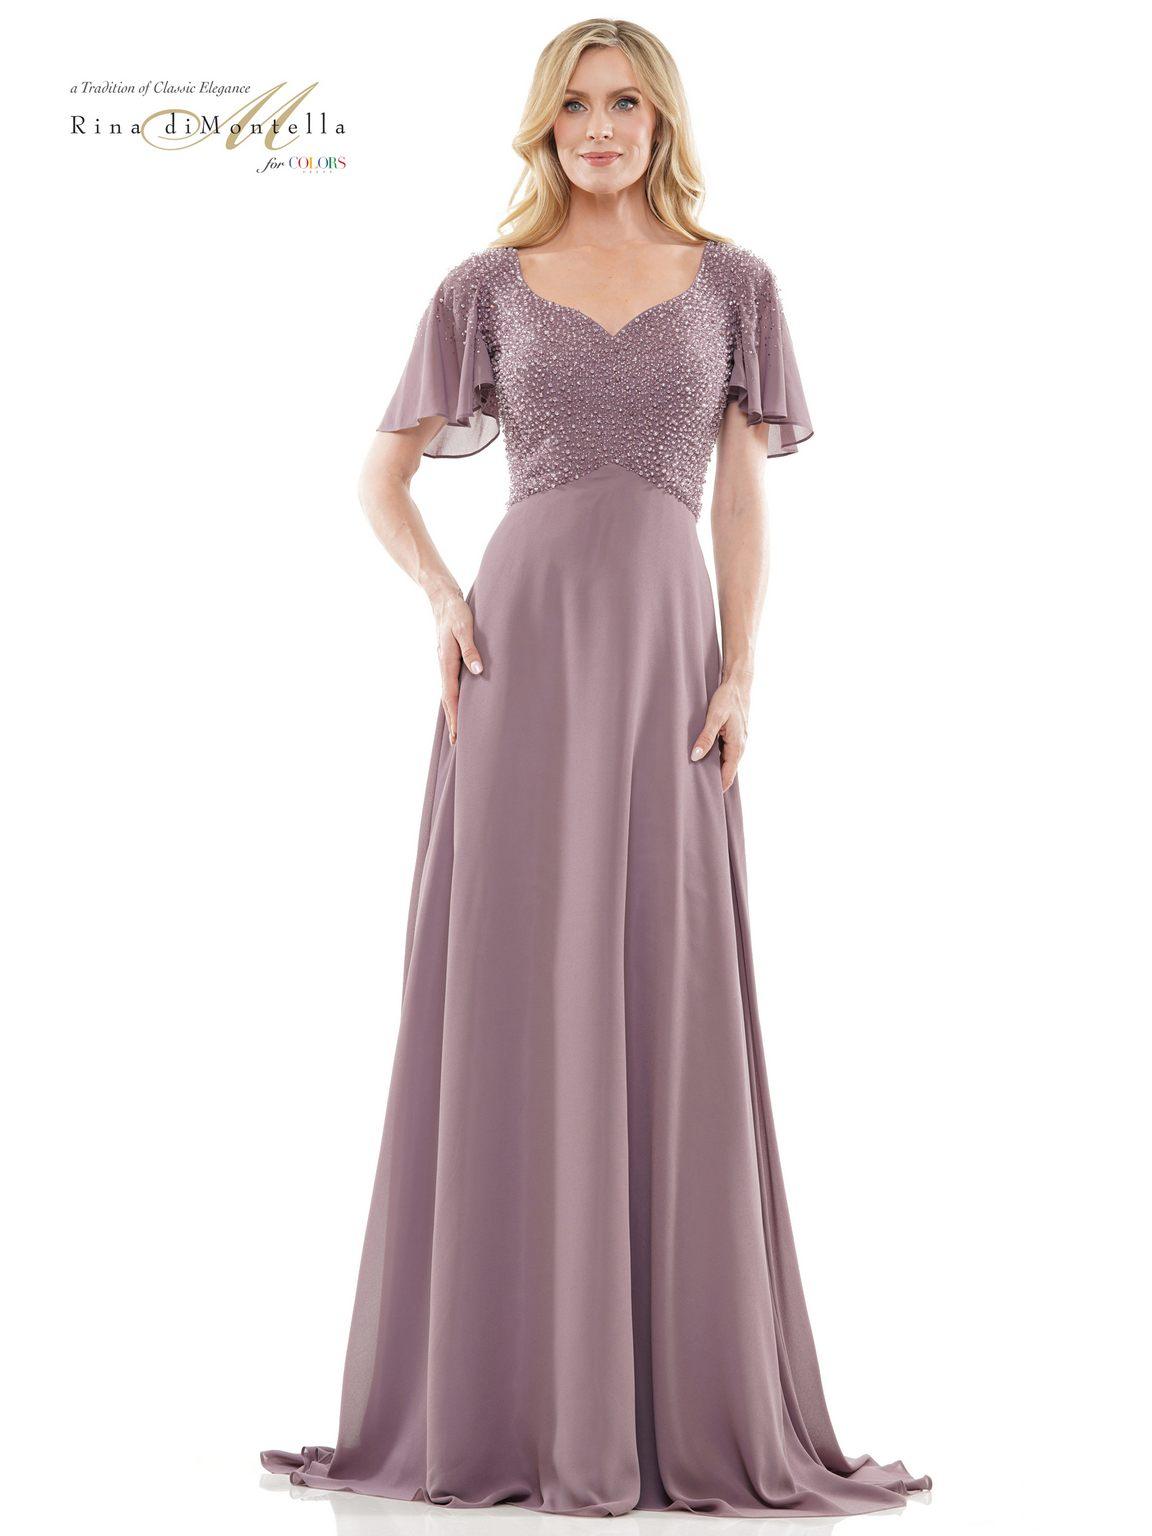 Mother of the Bride Dresses Long Mother of the Bride Formal Dress Victorian Lilac